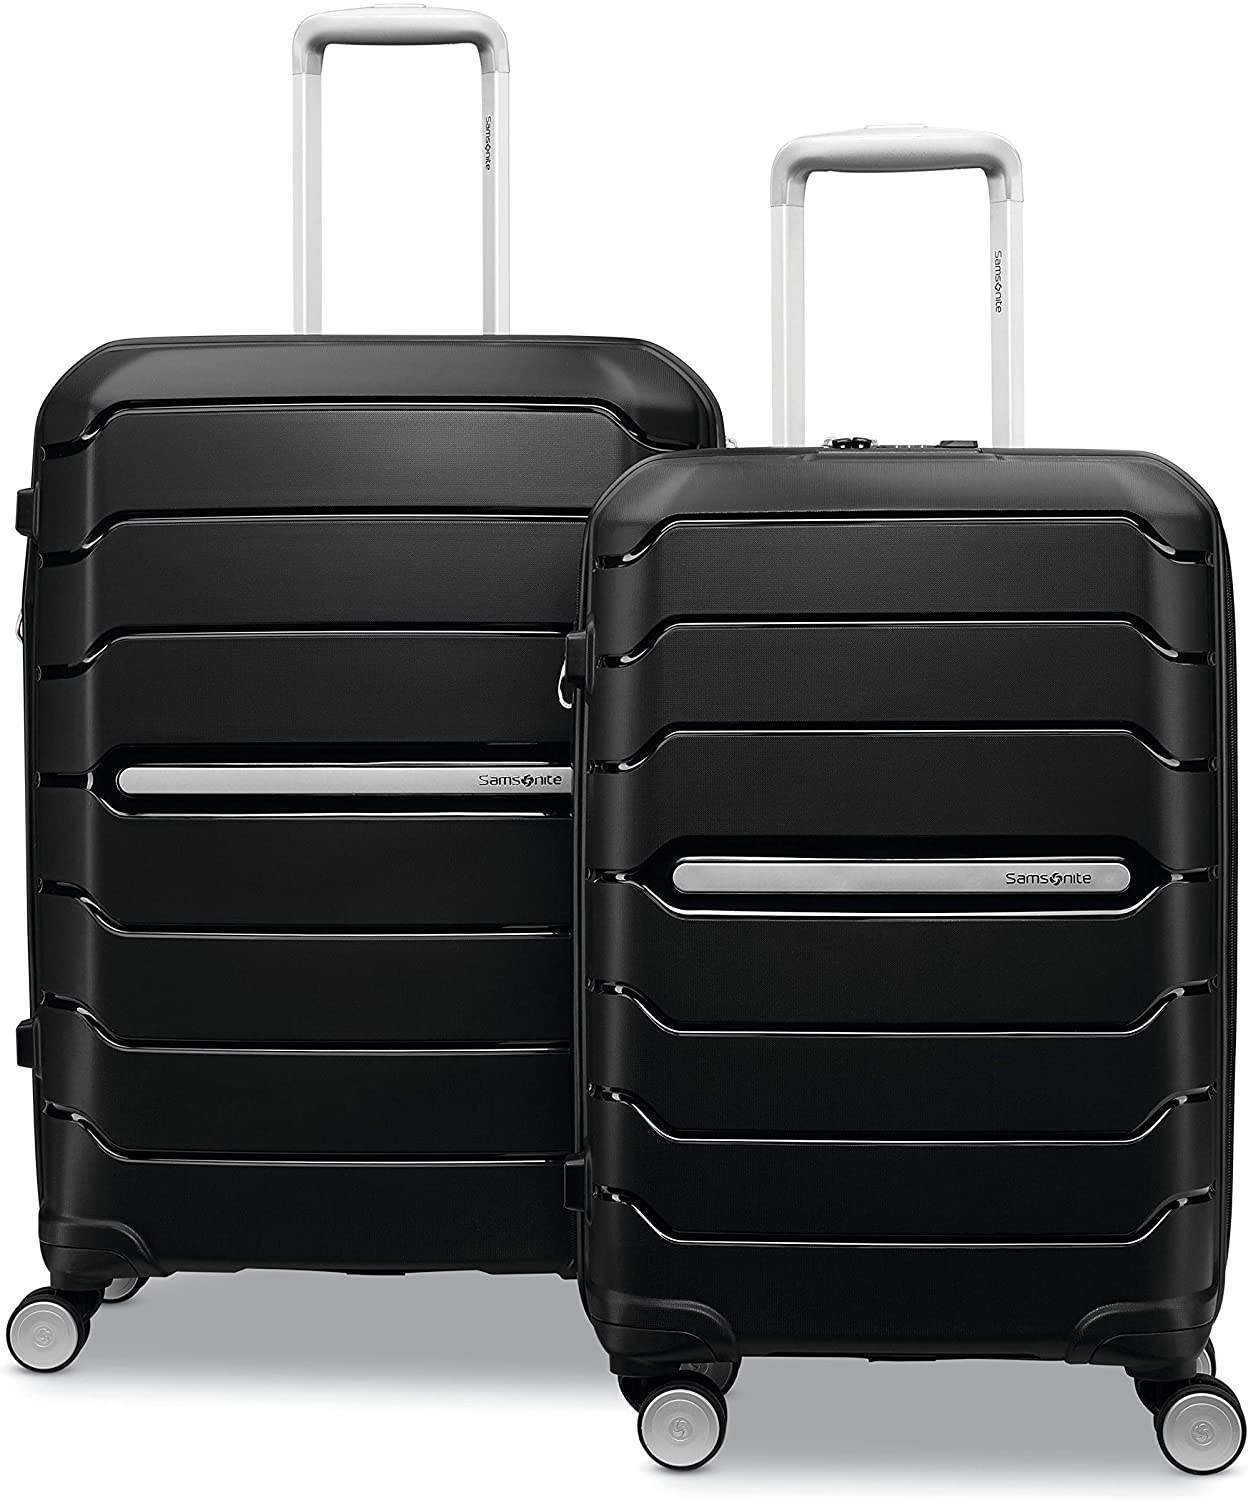 The appearance and elegance of this luggage collection are also one of its primary selling points, with the entire collection manufactured with standards of beauty in mind.